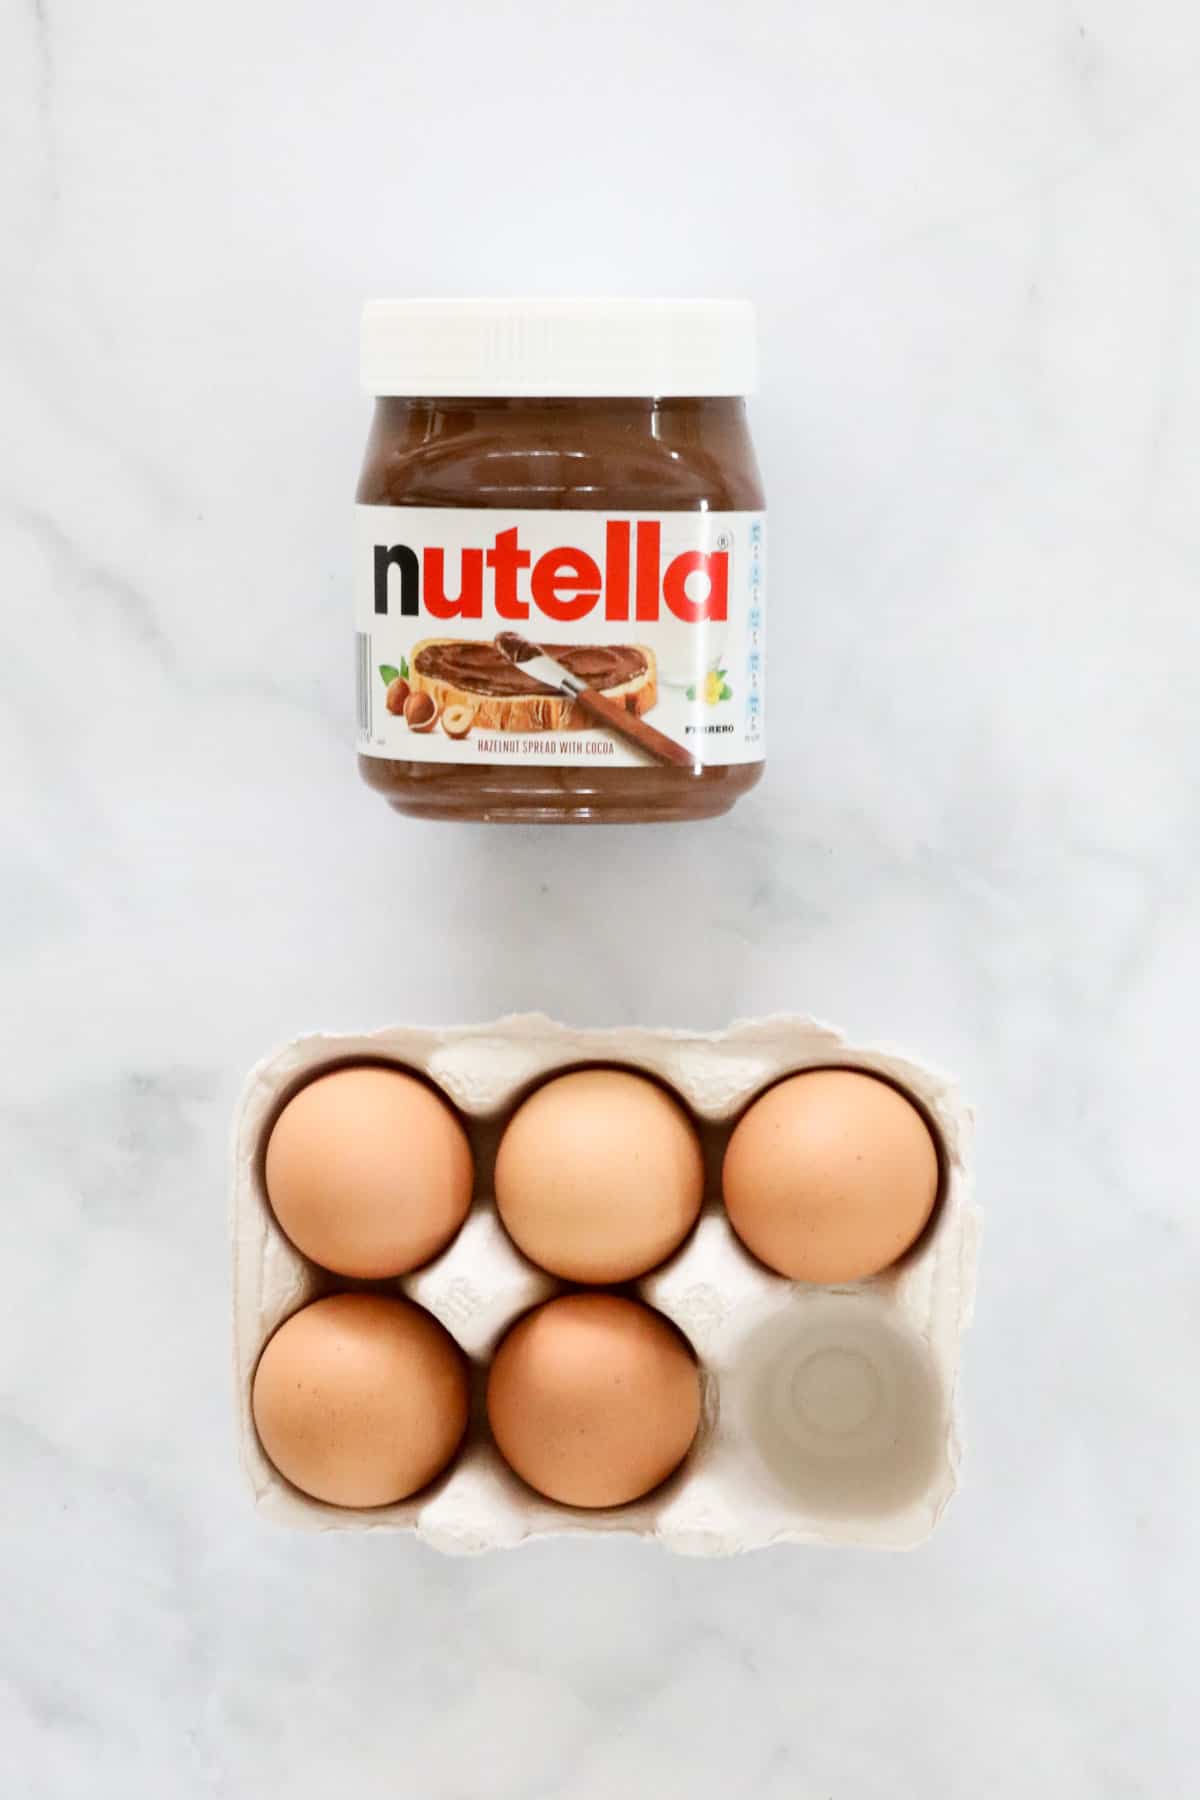 A jar of Nutella and 5 eggs, the only ingredients needed to make the cake.